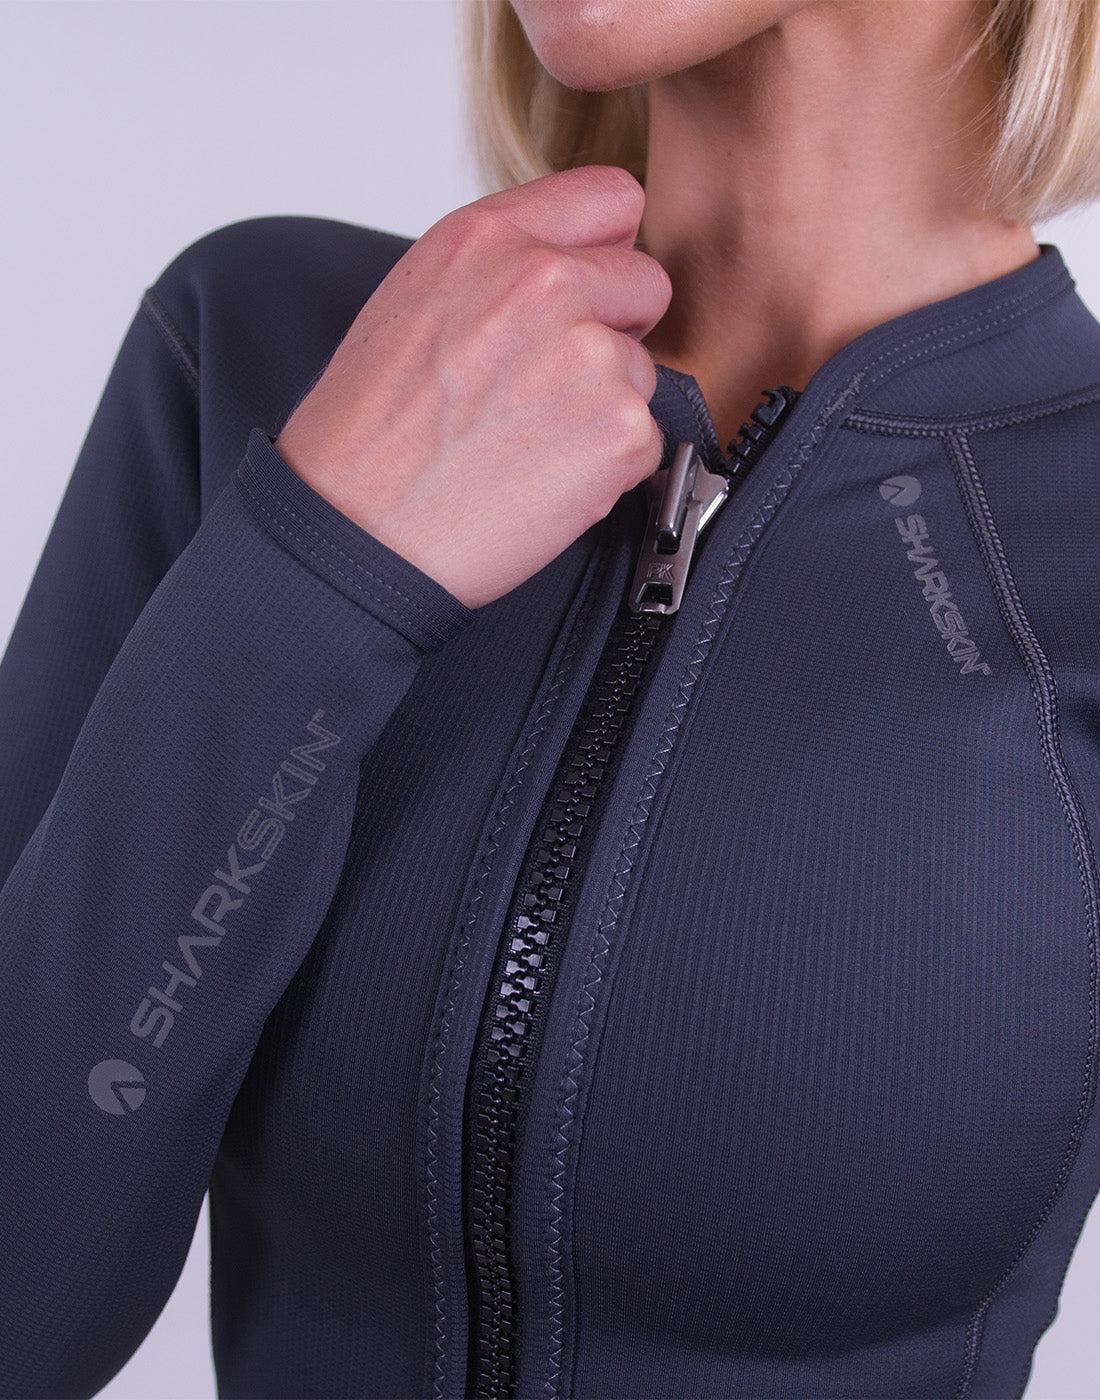 T2 CHILLPROOF LONG SLEEVE FULL ZIP TOP - WOMENS